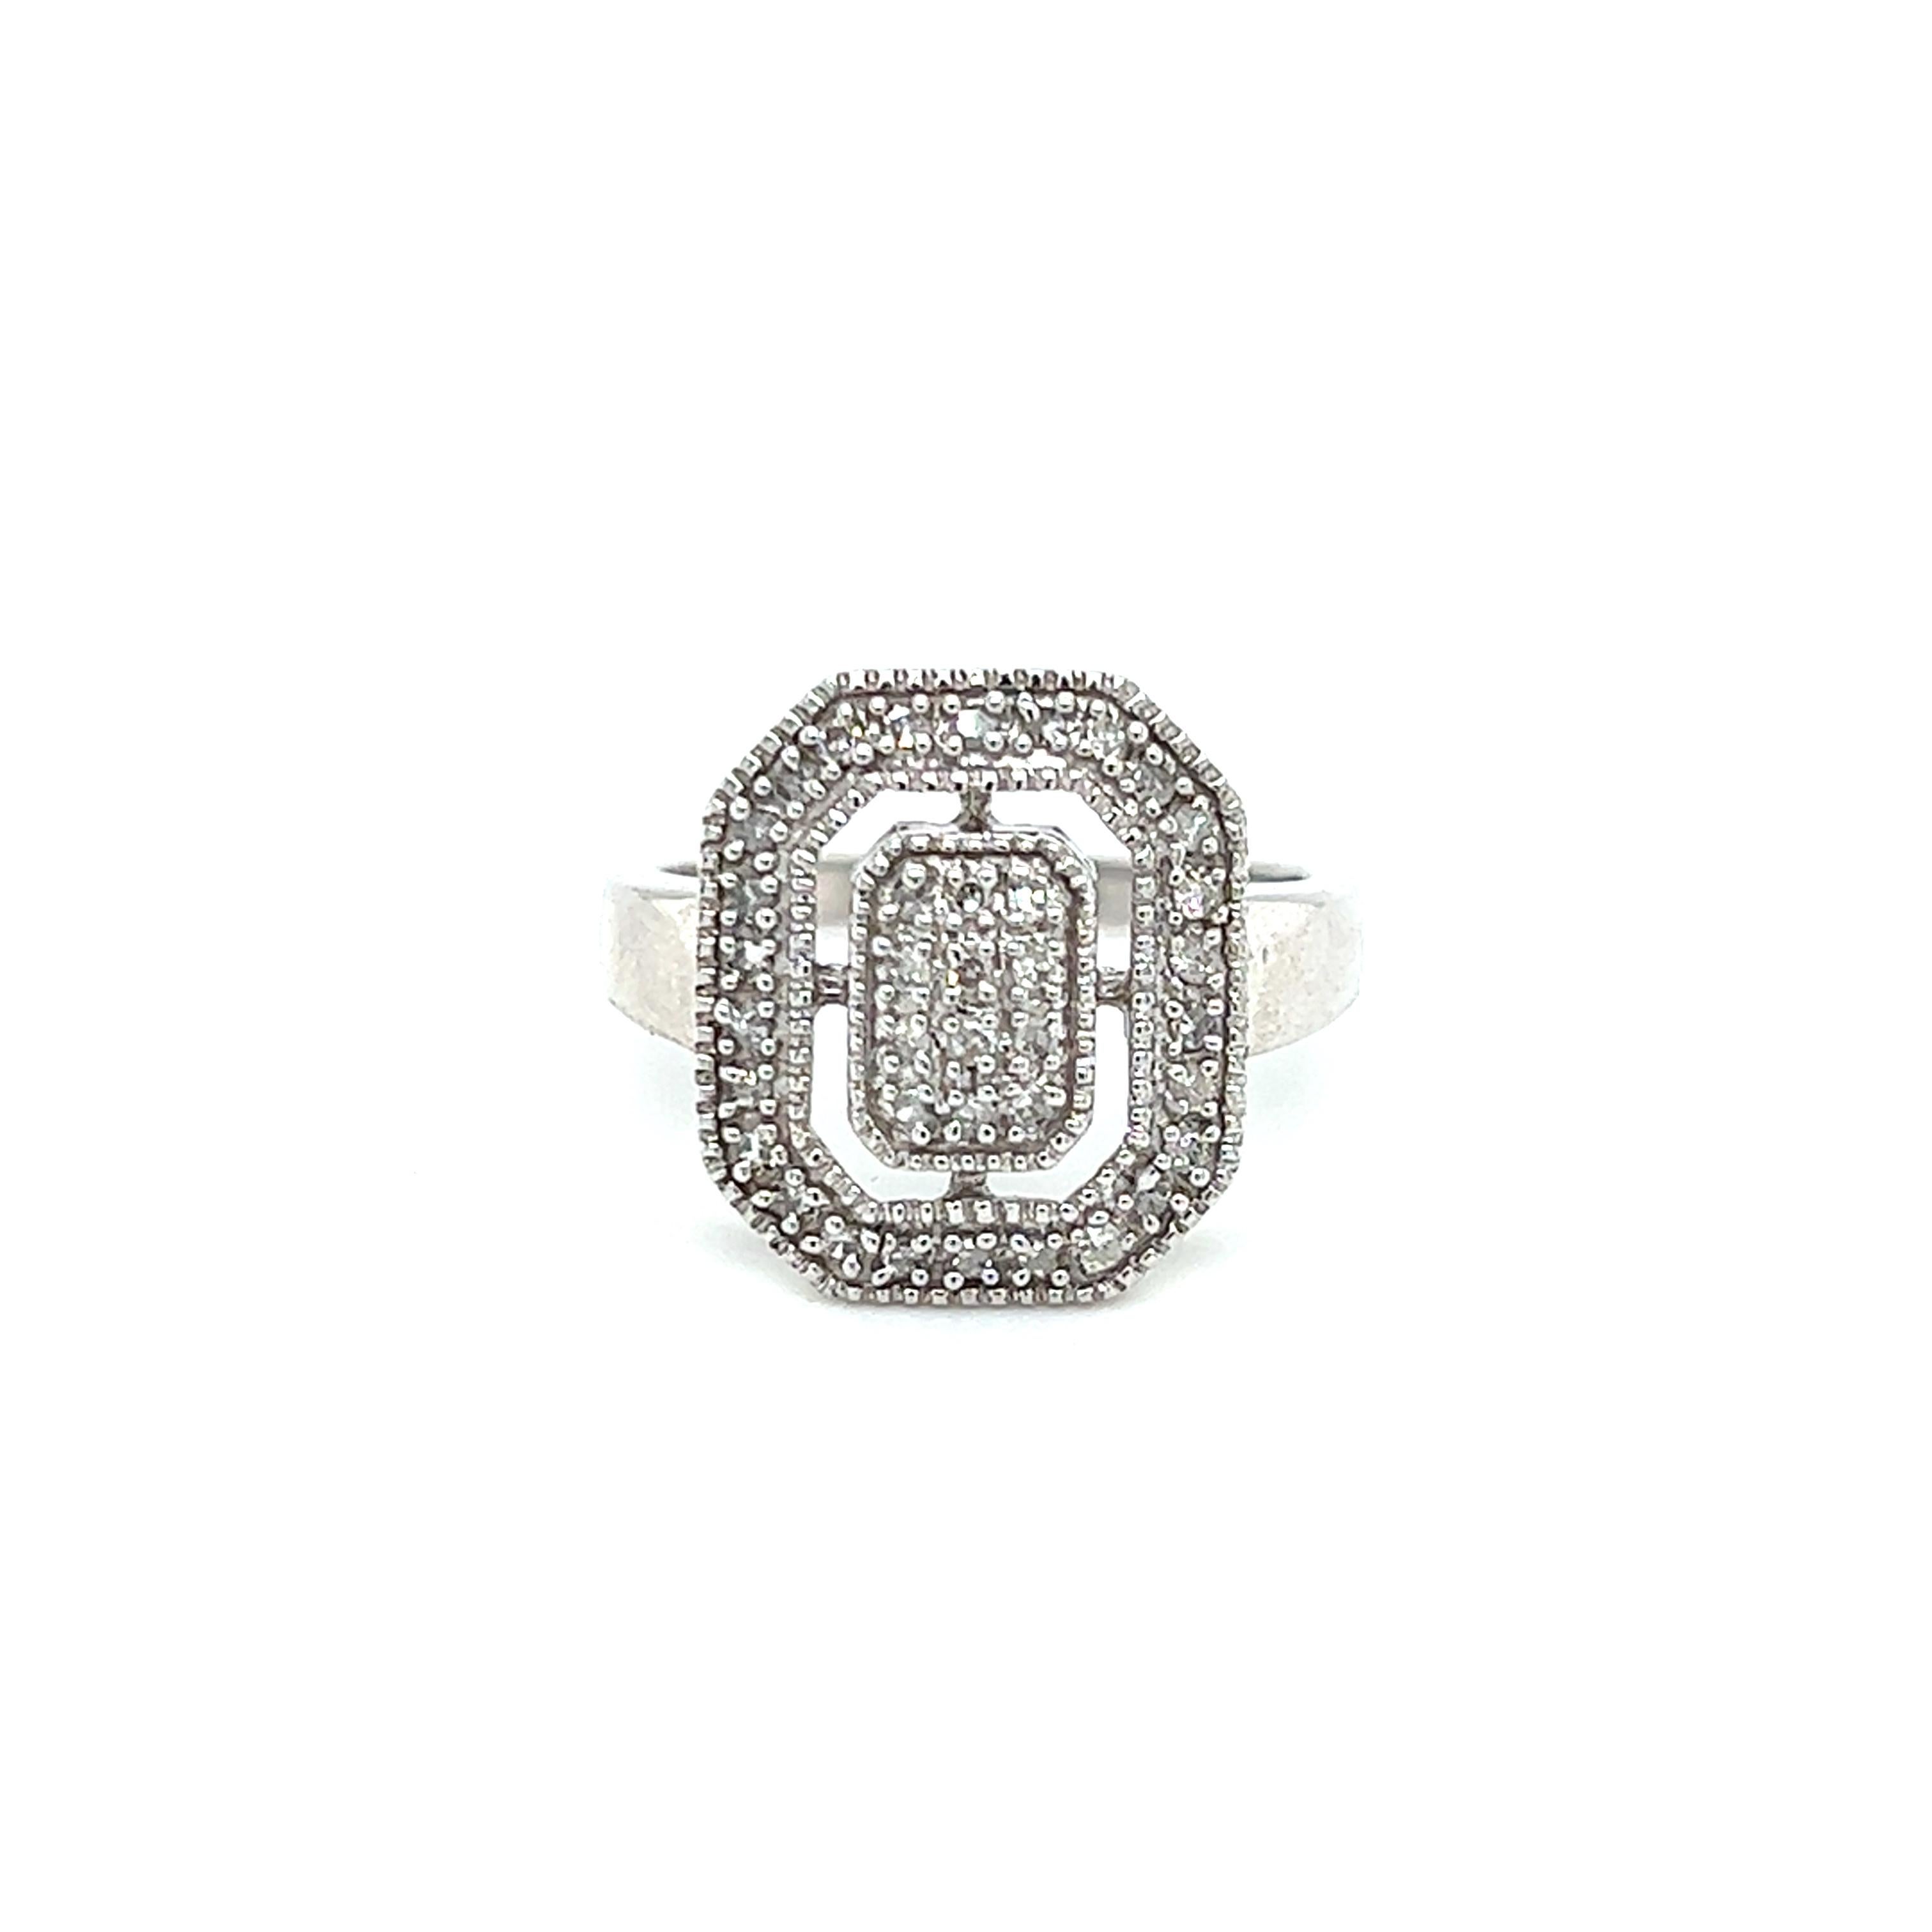 One 10-karat white gold diamond cluster ring set with thirty-eight (38) brilliant cut diamonds, approximately 0.65-carat total weight with matching H/I color and I1 clarity. The ring is a finger size 7 and is resizable.  Sizing is not included.  